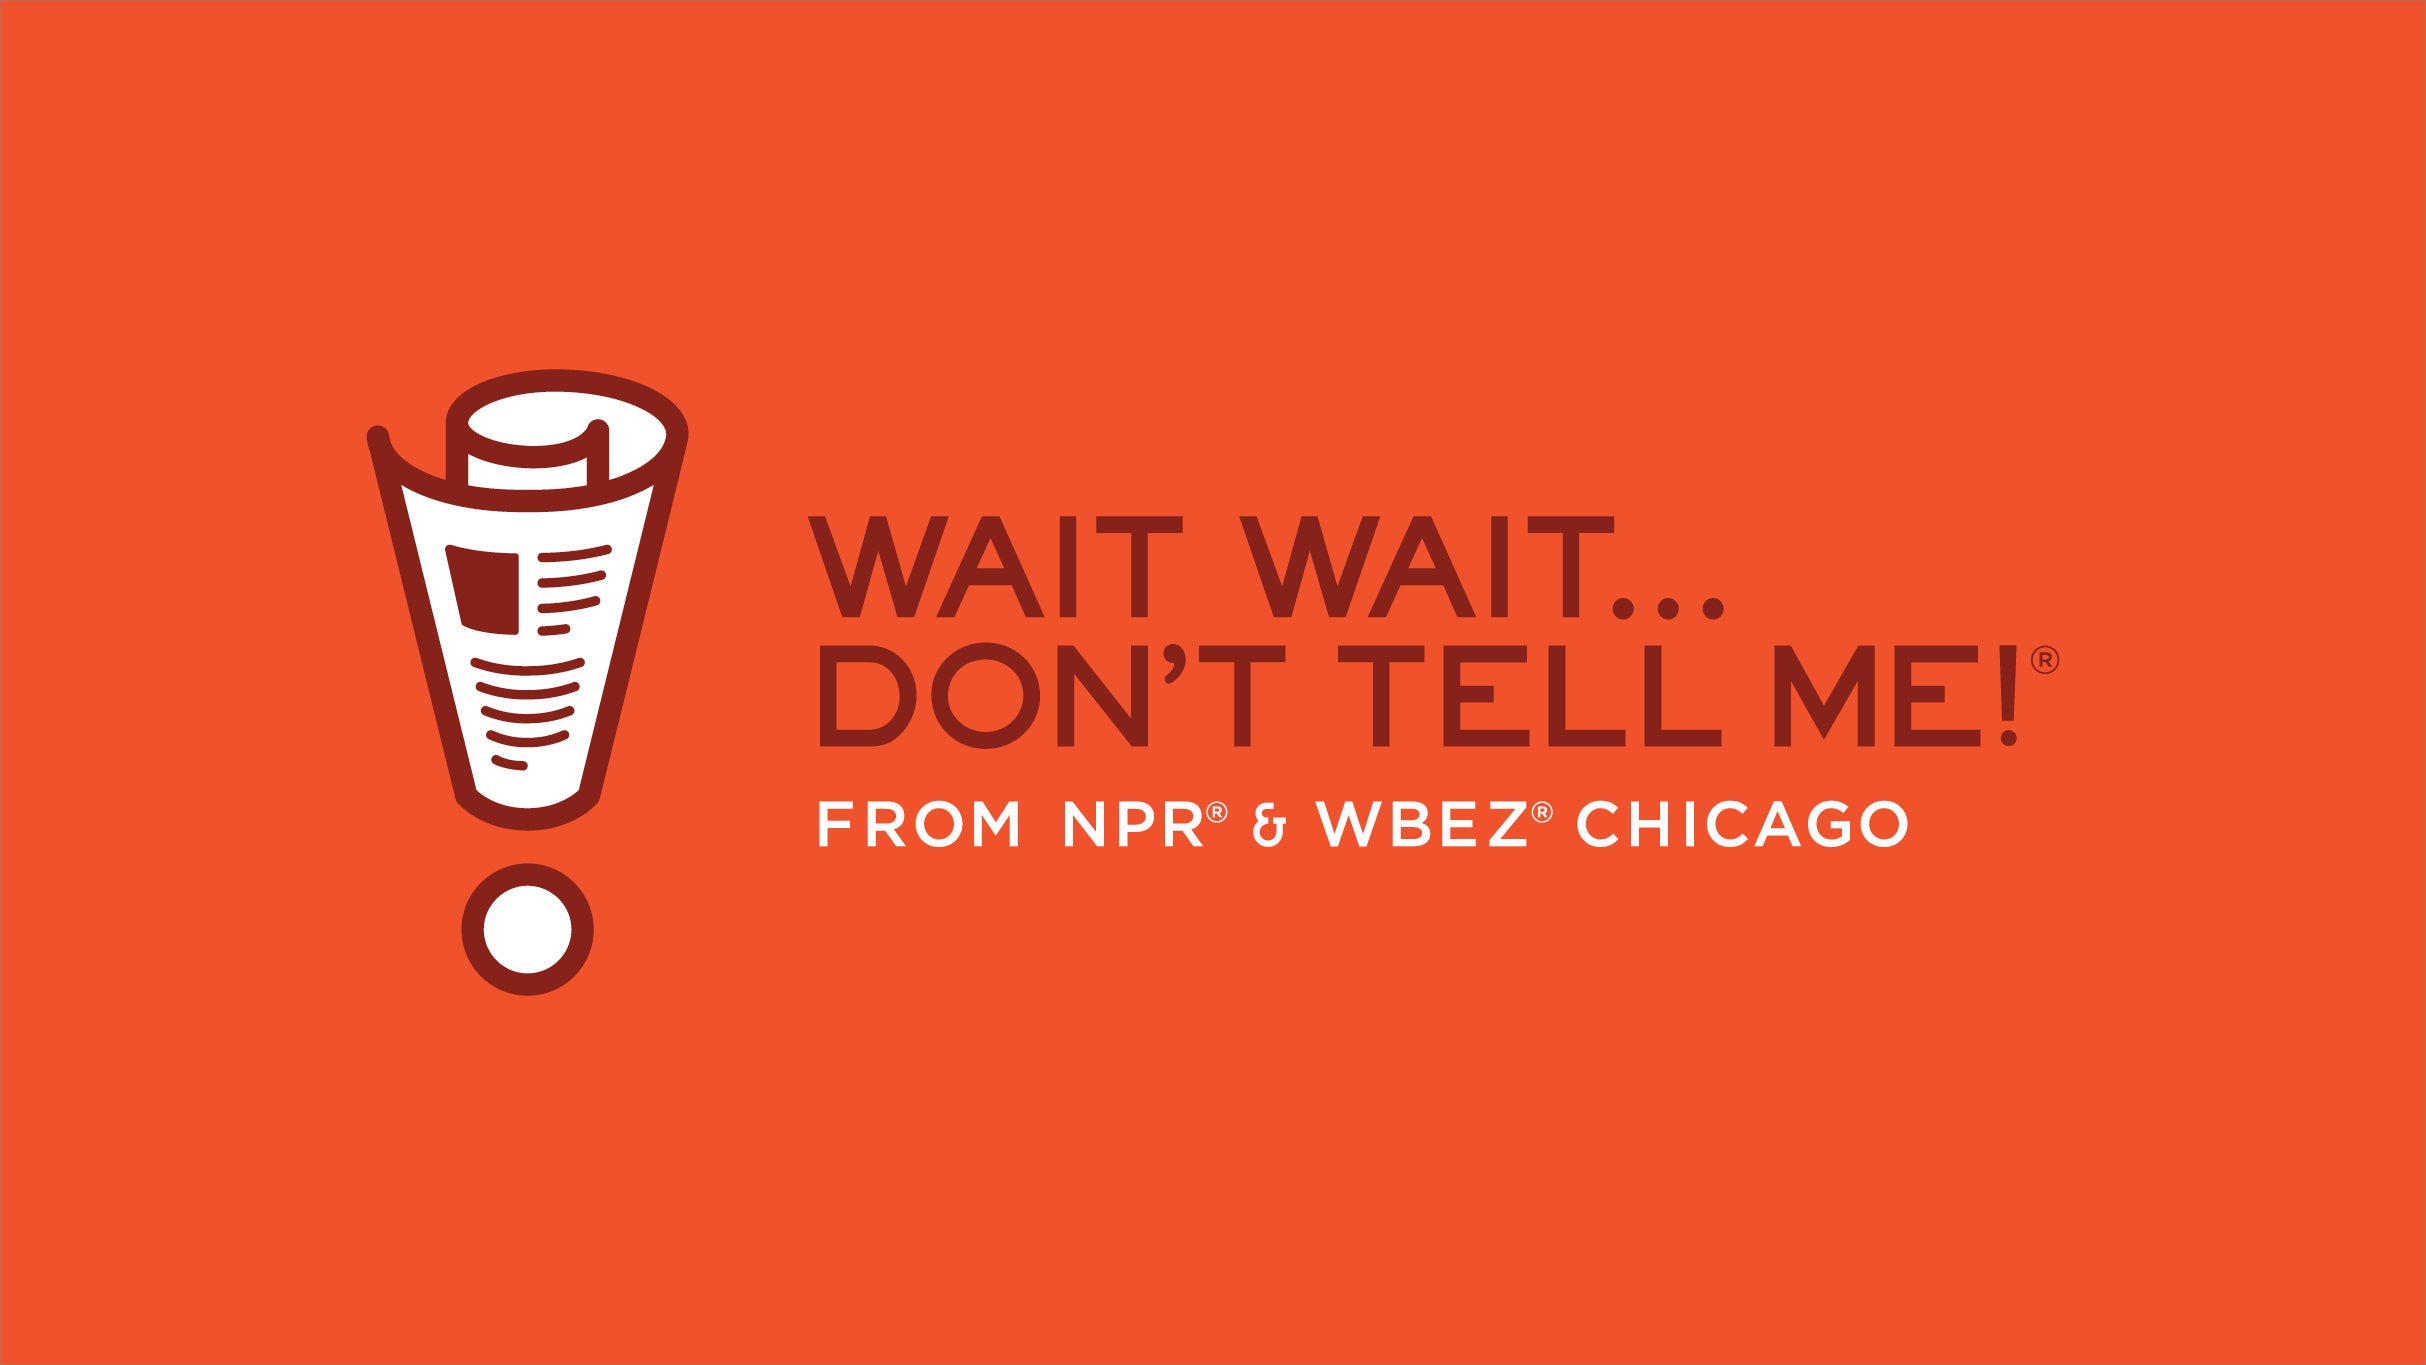 NPR Presents WAIT, WAIT...DON'T TELL ME! in association with WHYY presale passwords